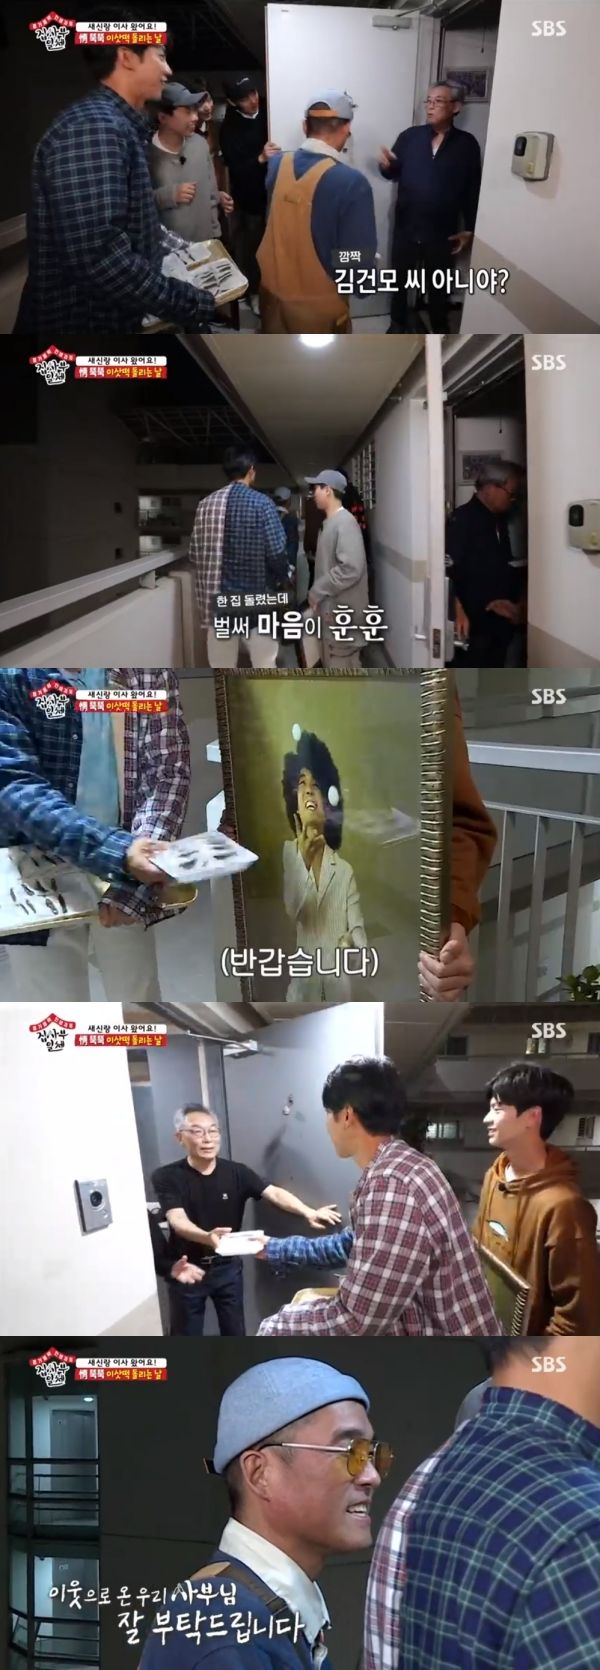 The new groom Kim Gun-mo turned the move.On SBS All The Butlers broadcasted on the 10th, there was a picture of Kim Gun-mo, a new groom who turns the rice cake.On the day of the broadcast, Kim Gun-mo held a rice cake with the members and rang the doorbell of the neighbors house.Kim Gun-mo said, Please have a delicious rice cake. Lee Seung-gi said, Master Kim Gun-mo moved here. Thank you for your understanding.Neighbors welcomed Kim Gun-mo, saying, Welcome.After the visit, Lee Seung-gi added, You do not know who lives next door. It is full of humanity. Yang Se-hyung and Lee Sang-yoon also said, It feels good.I feel good, and I feel like a neighbor. 